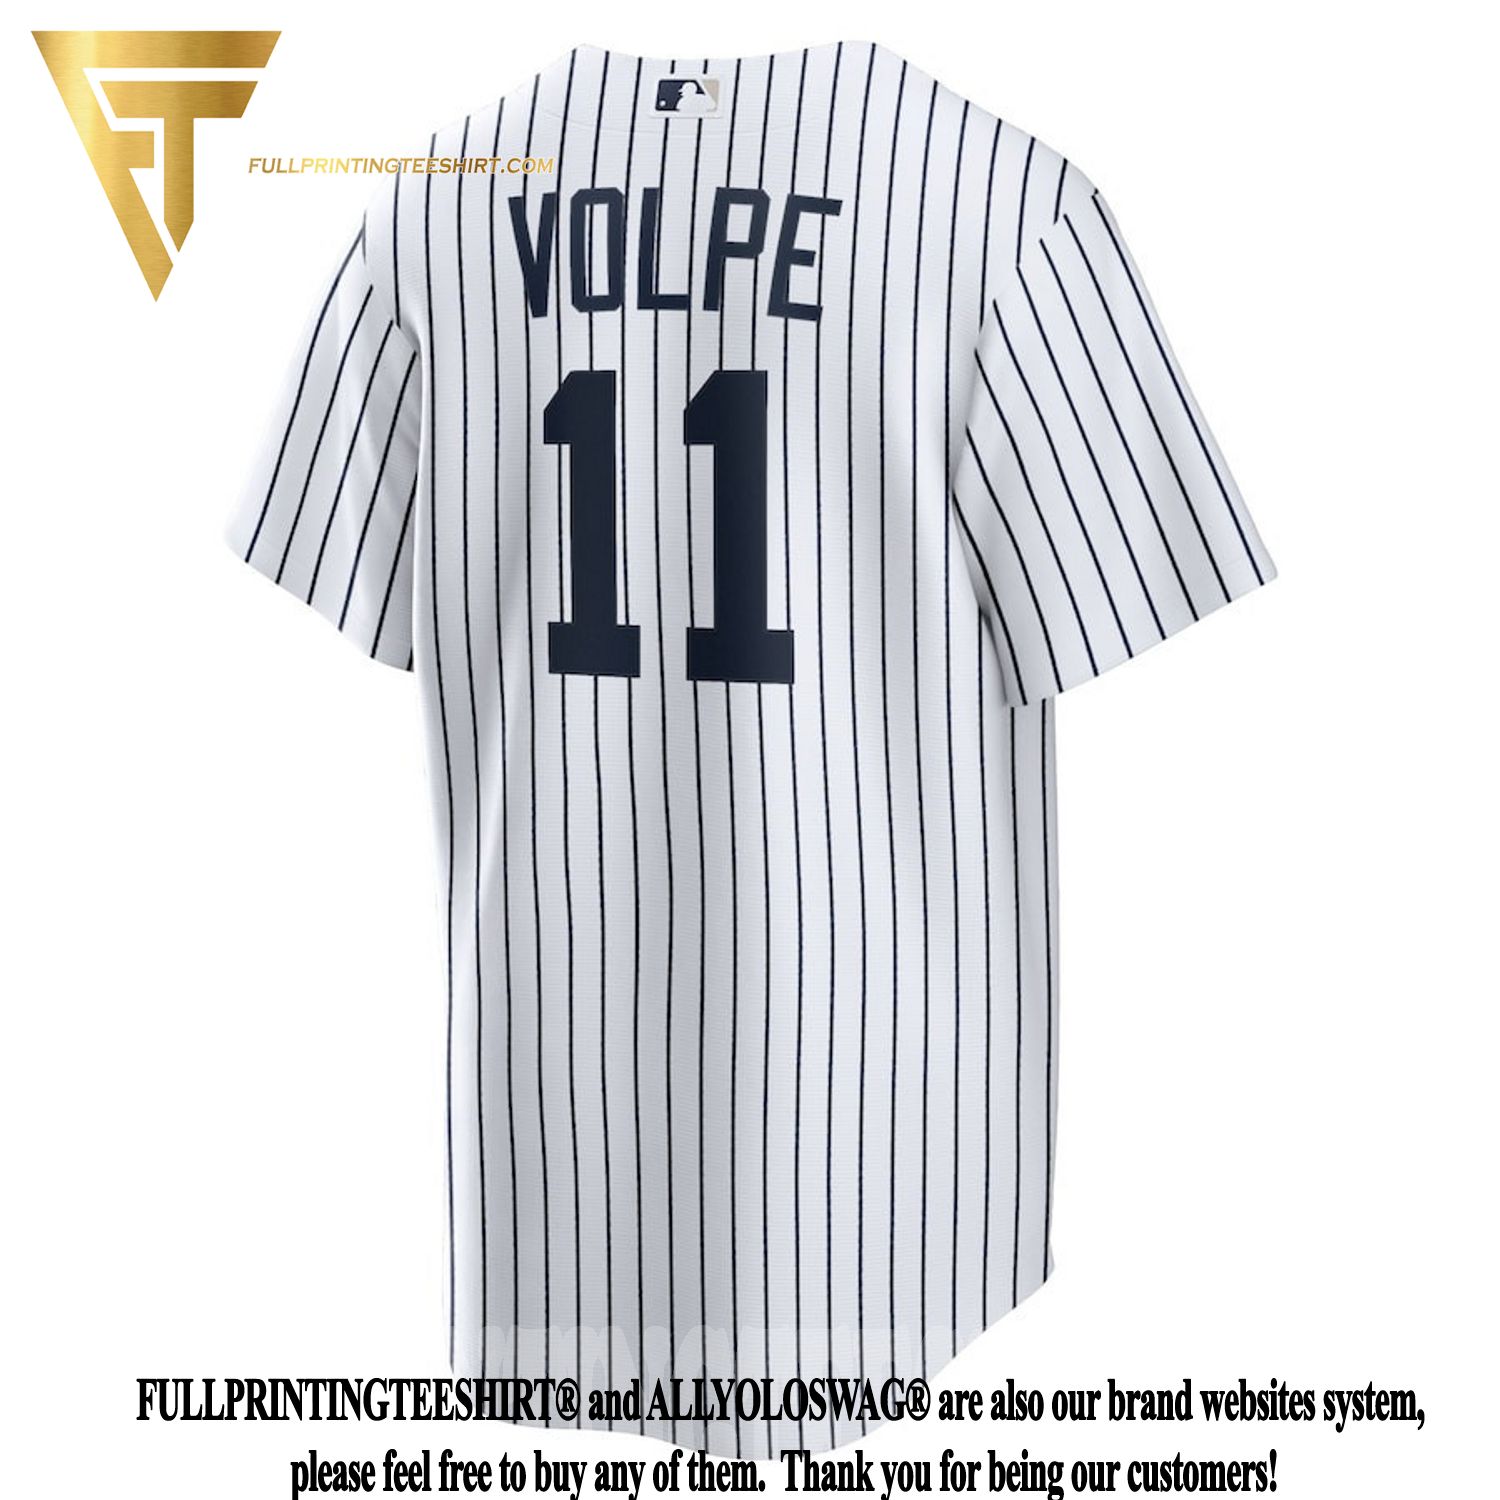 Top-selling Item] Anthony Volpe 11 New York Yankees Home Men - White